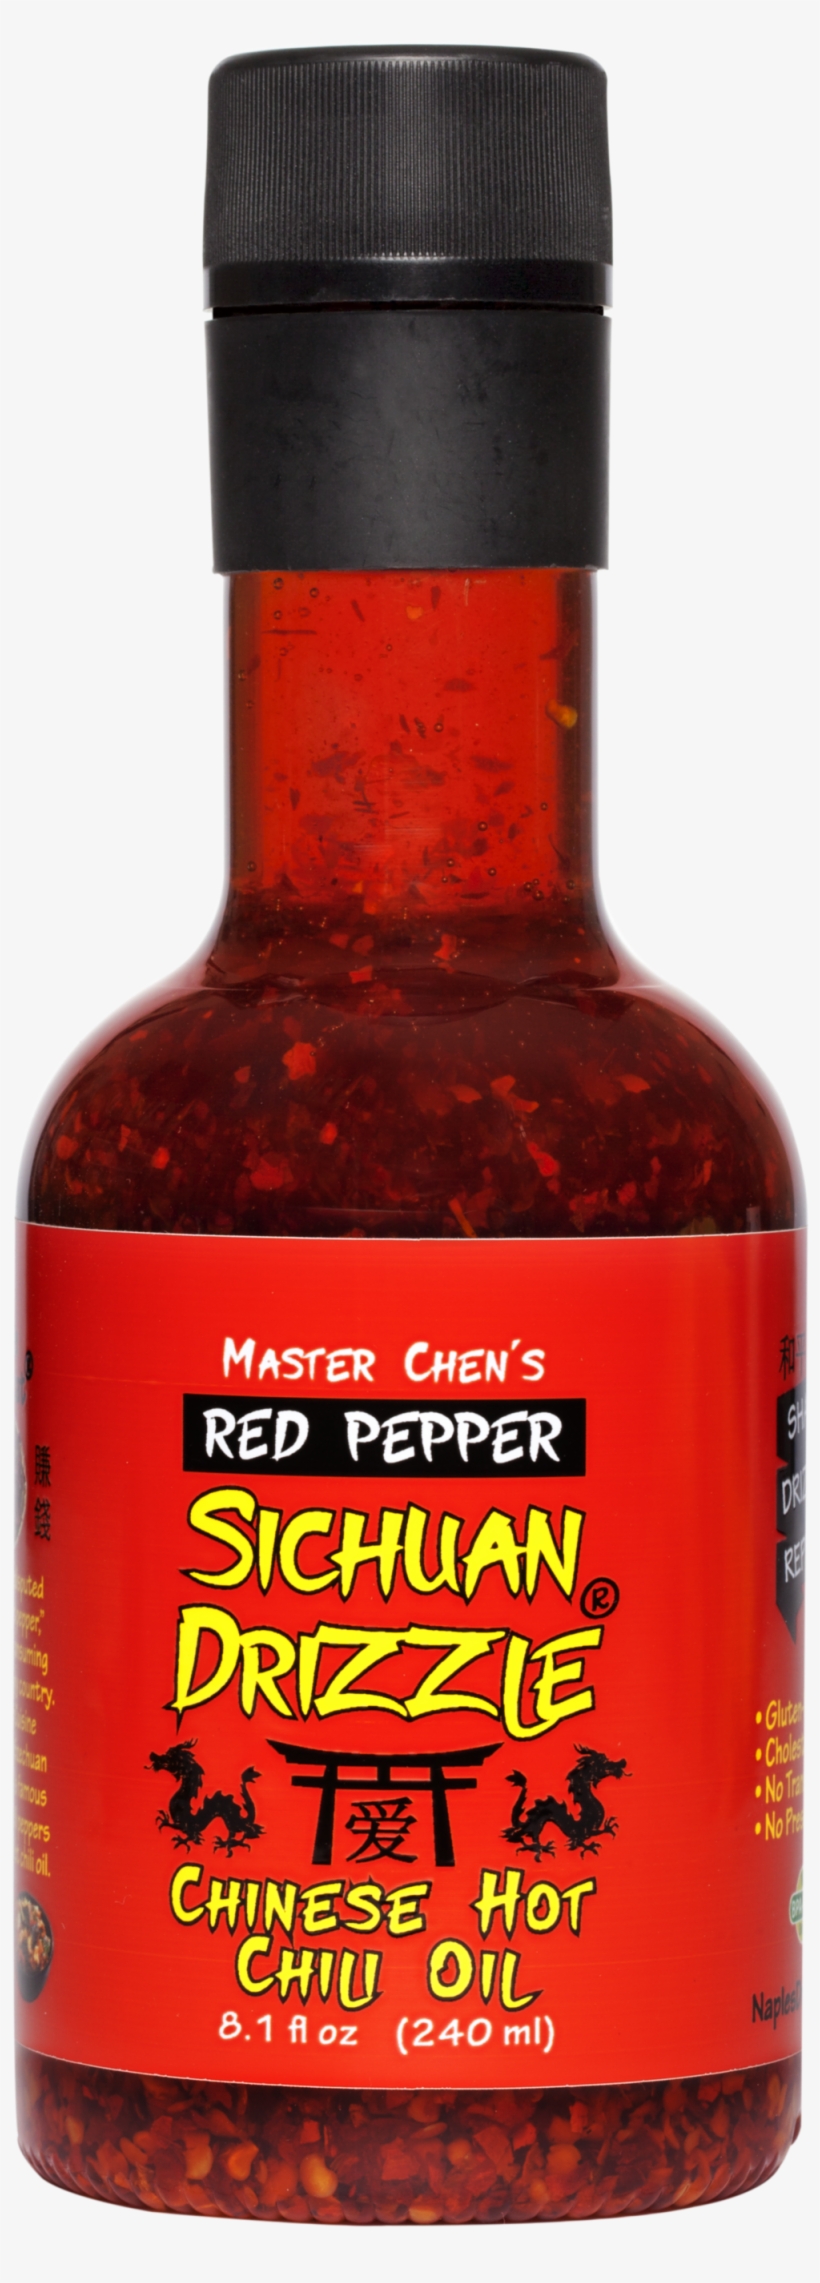 Sichuan Drizzle® Chinese Hot Chili Oil - Sichuan Drizzle Chinese Chili Oil, transparent png #5807007